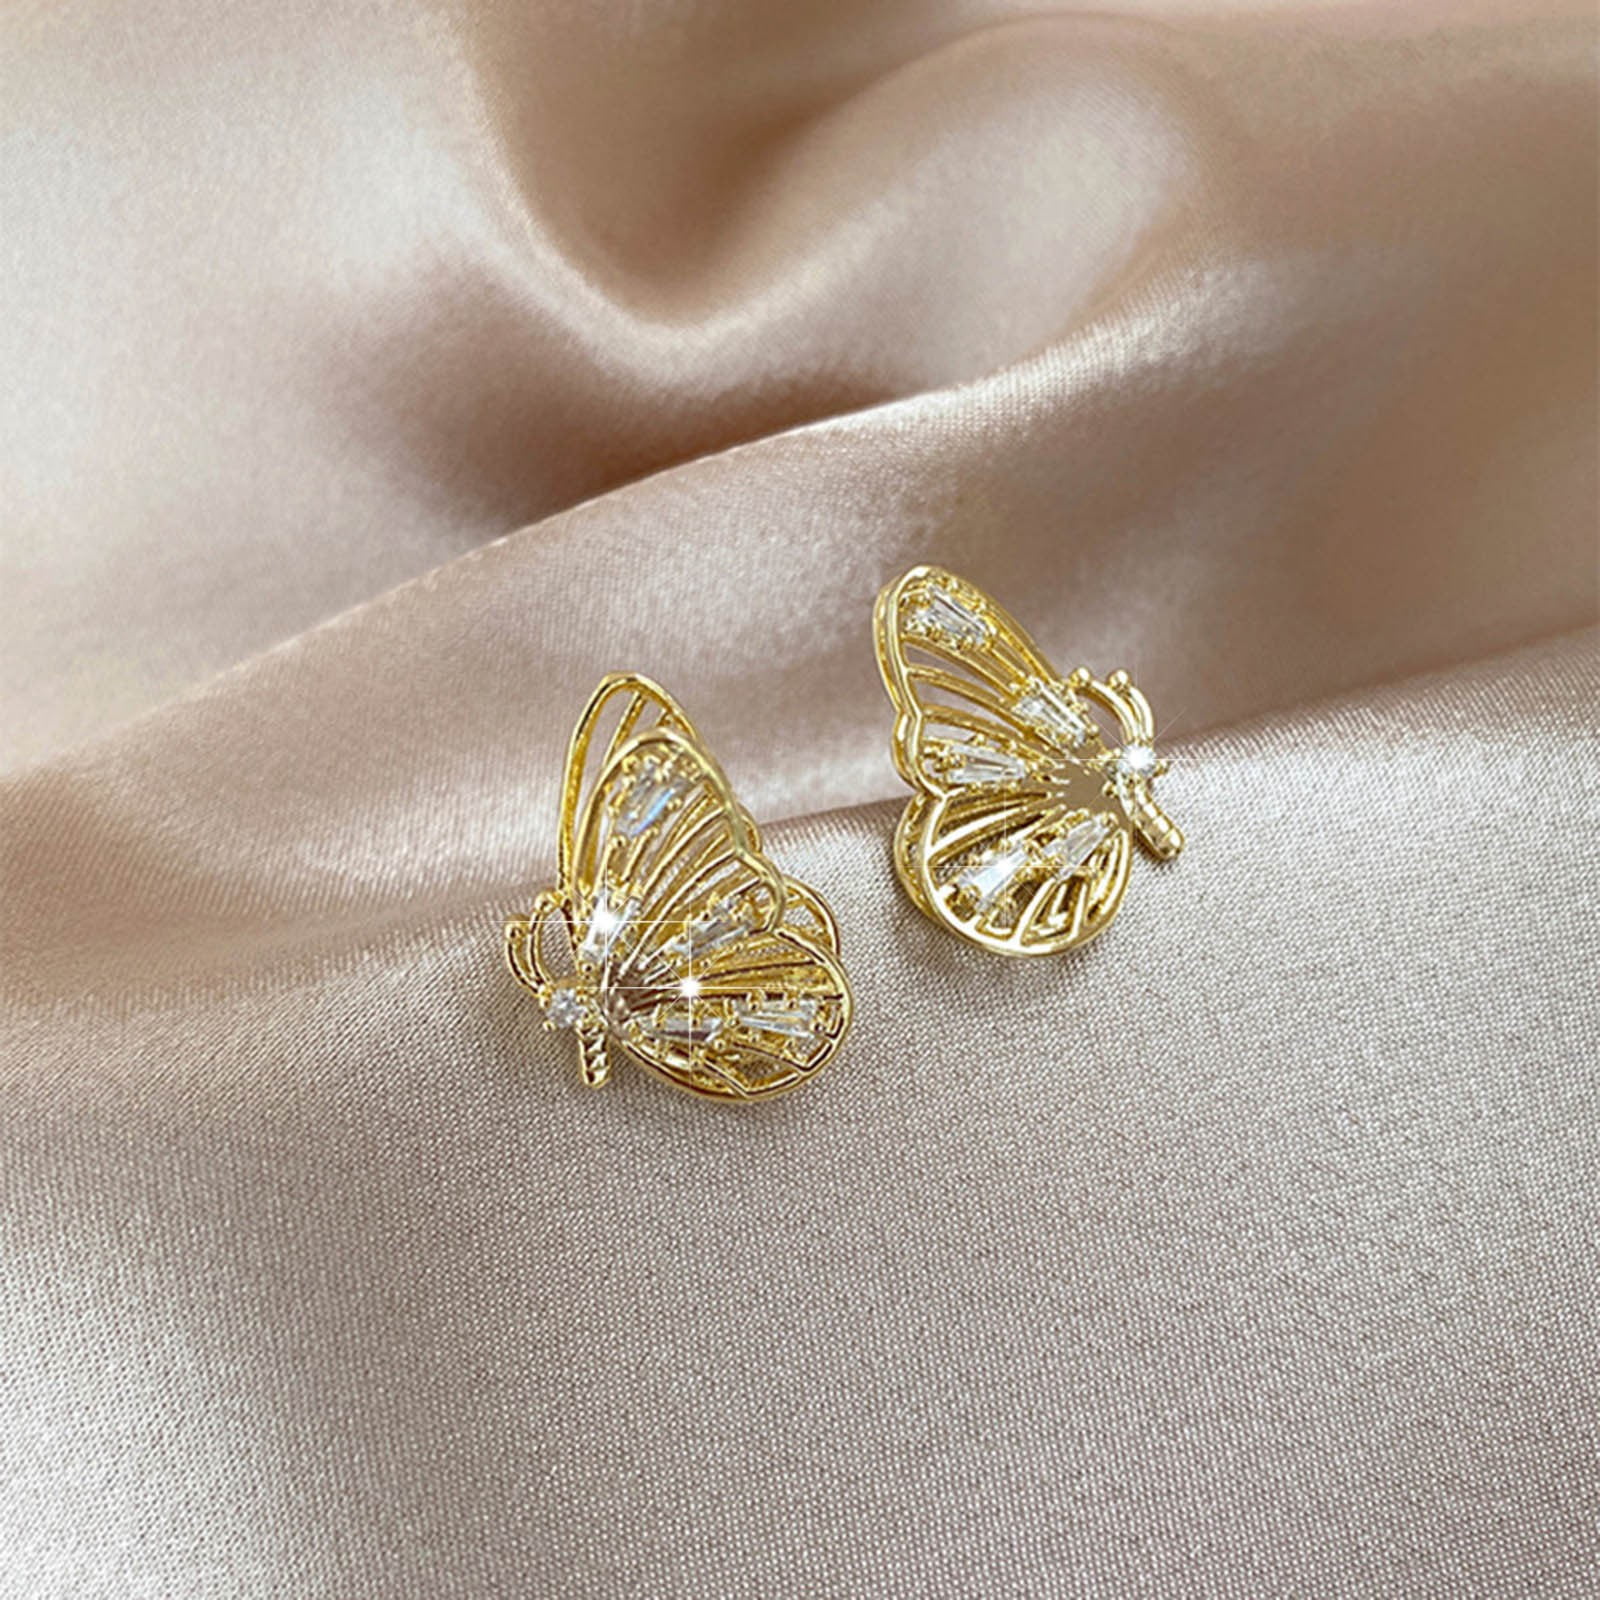  FRCOLOR 2 Pairs Butterfly Clip Earrings Earring Studs for Women Earrings  Backs for Studs Fairy Earrings Womens Gold Earrings Dangle Earrings for  Girls Ear Cuffs Miss Temperament Alloy: Clothing, Shoes 